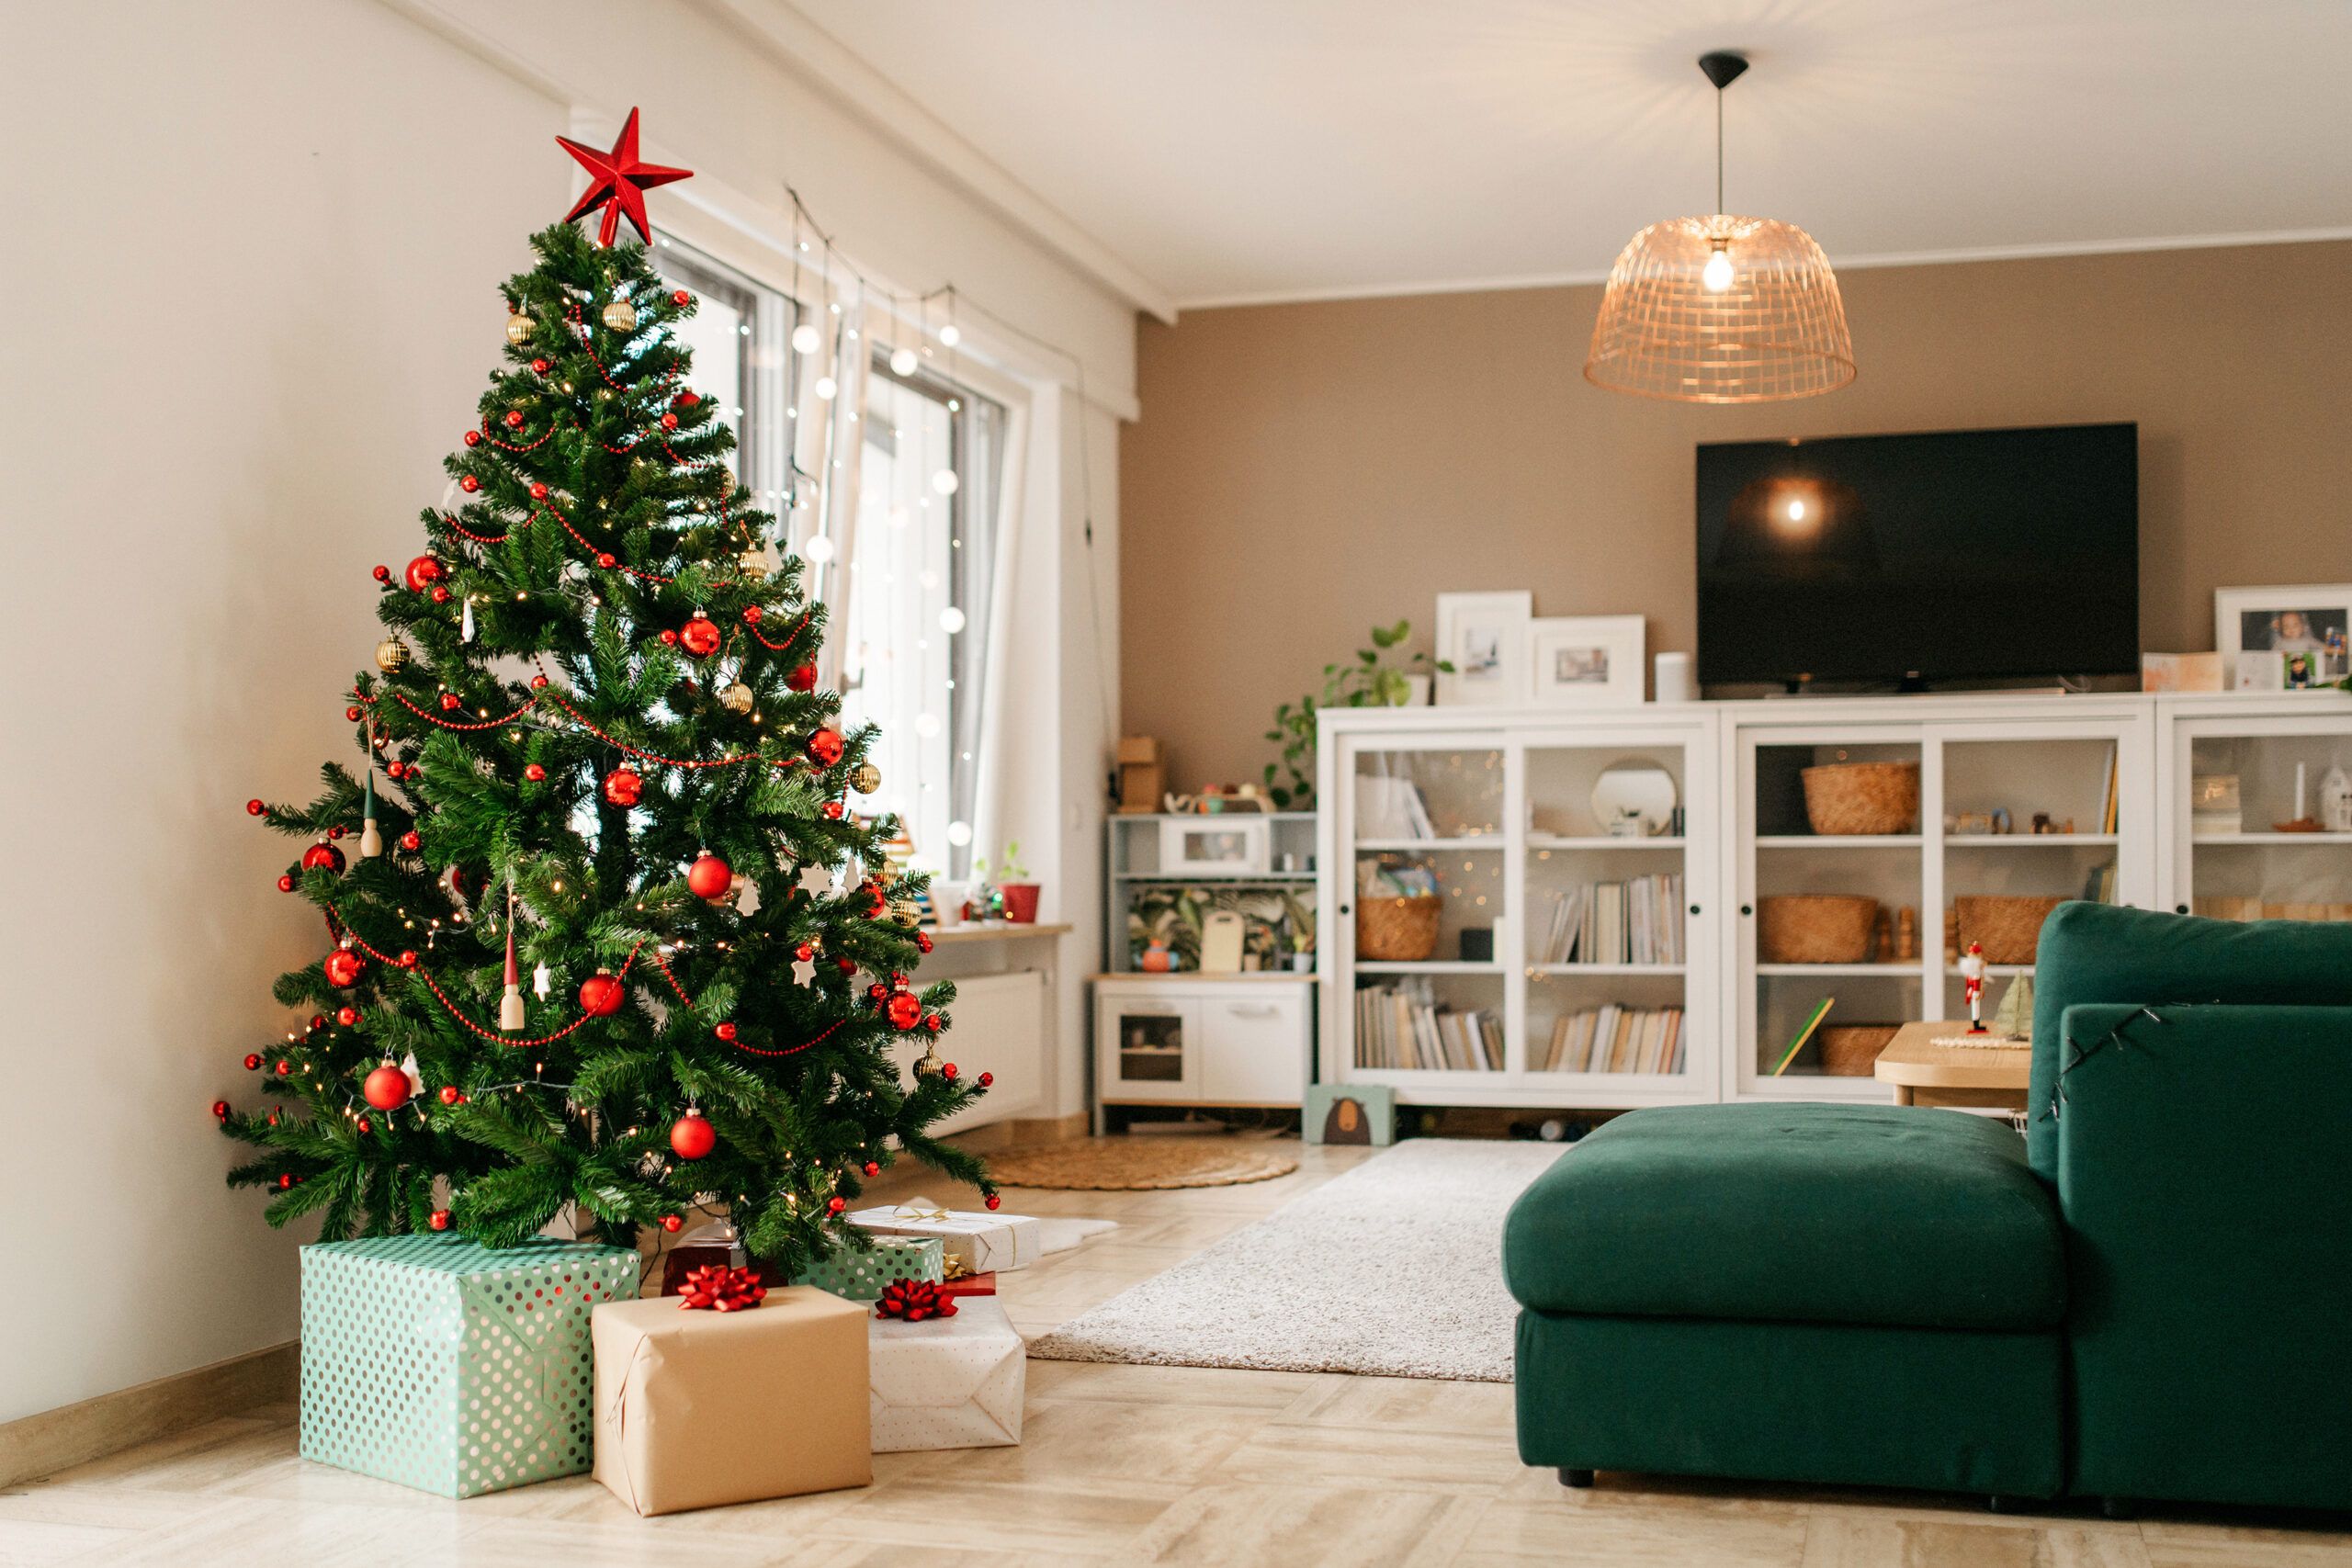 Lead image for Best Artificial Christmas Trees guide.